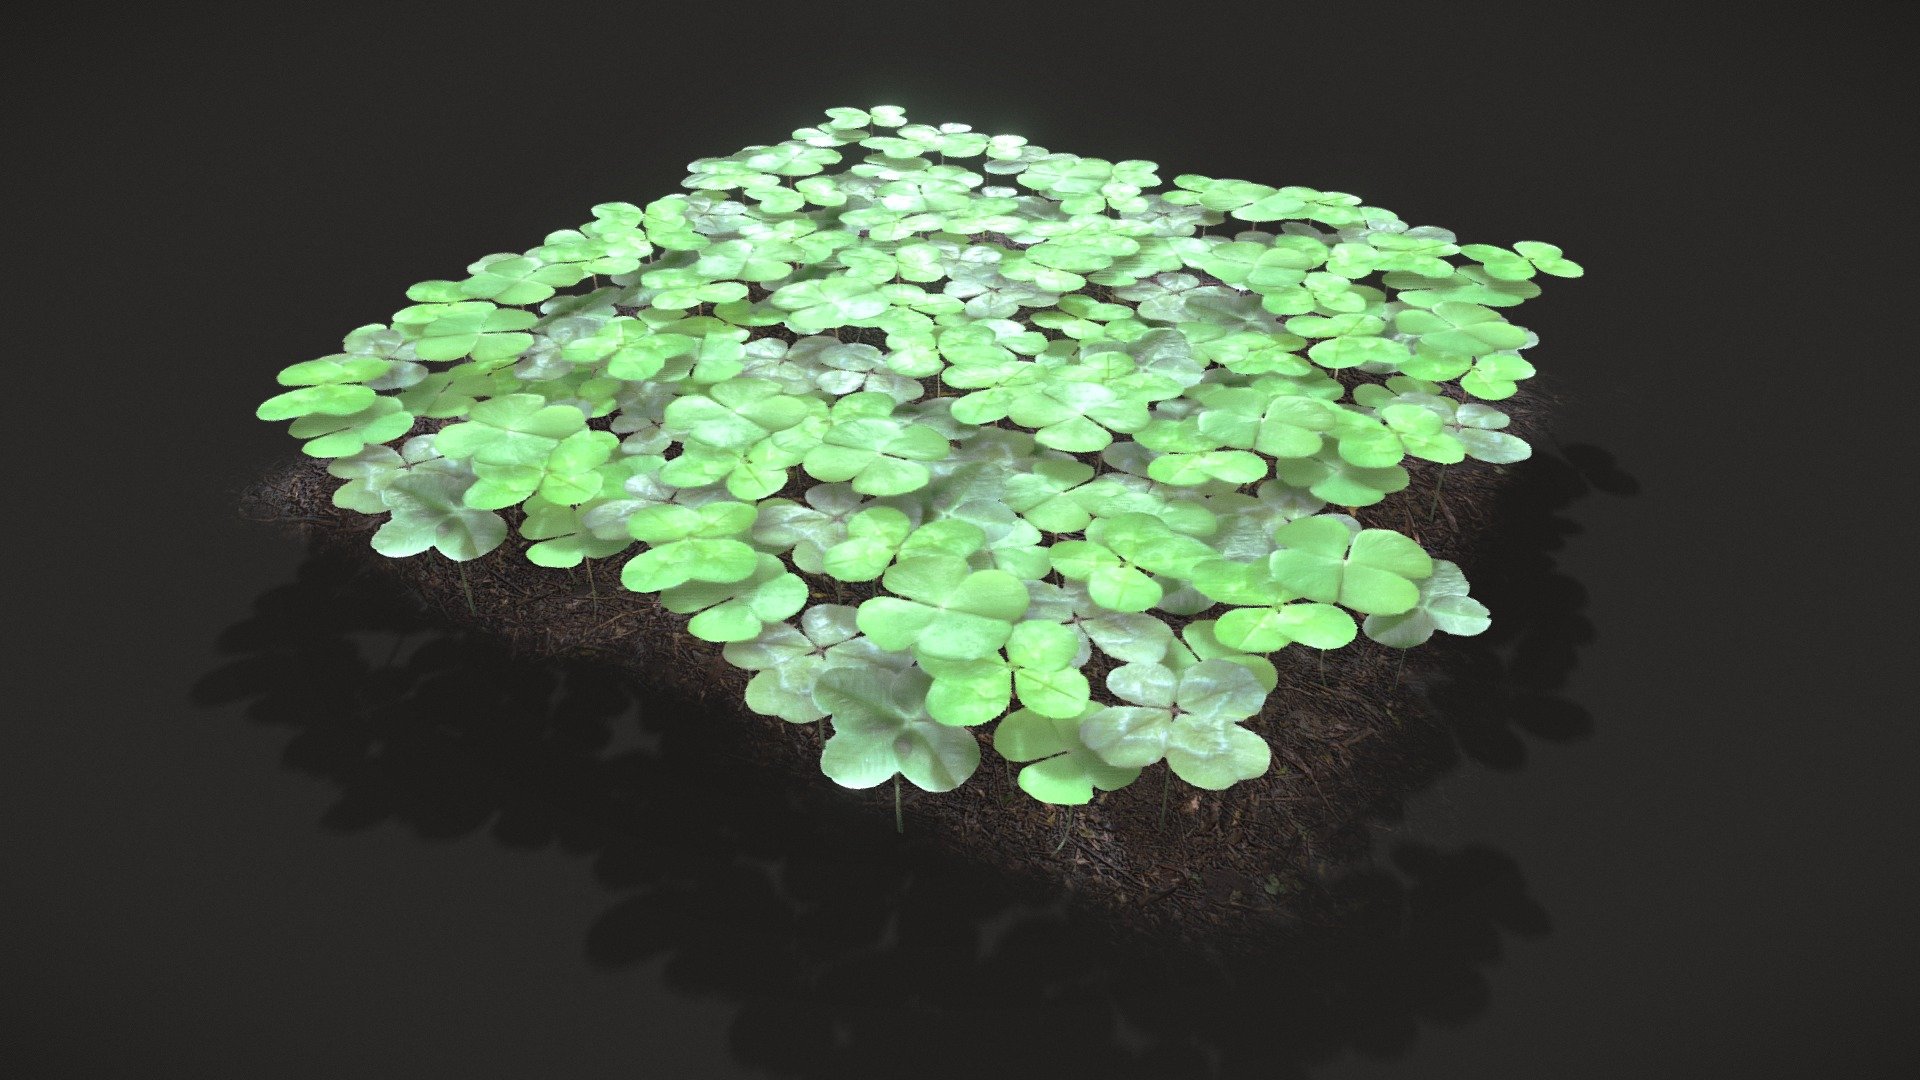 Four_Leaf_Clover_Patch_FBX
VR / AR / Low-poly
PBR: approved
GeometryPolygon mesh
Polygons: 888
Vertices: 2,317
Textures : PBR 4K - Four_Leaf_Clover_Patch - Buy Royalty Free 3D model by GetDeadEntertainment 3d model